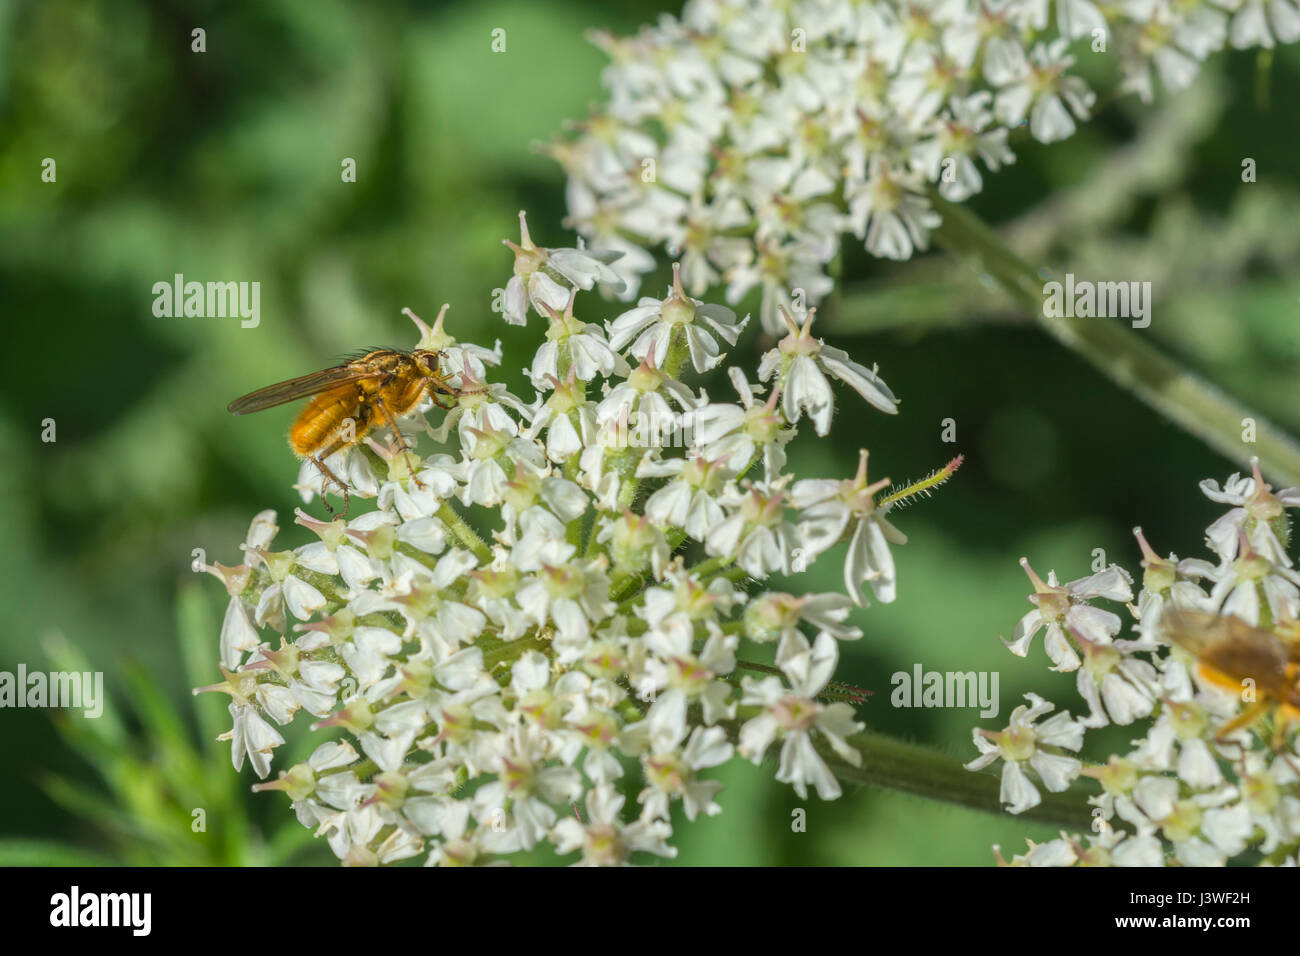 Hogweed / Cow Parsnip - Heracleum sphondylium - flower cluster with Yellow Dung Fly / Scathophaga sterconia feeding on nectar. Cow parsley family. Stock Photo